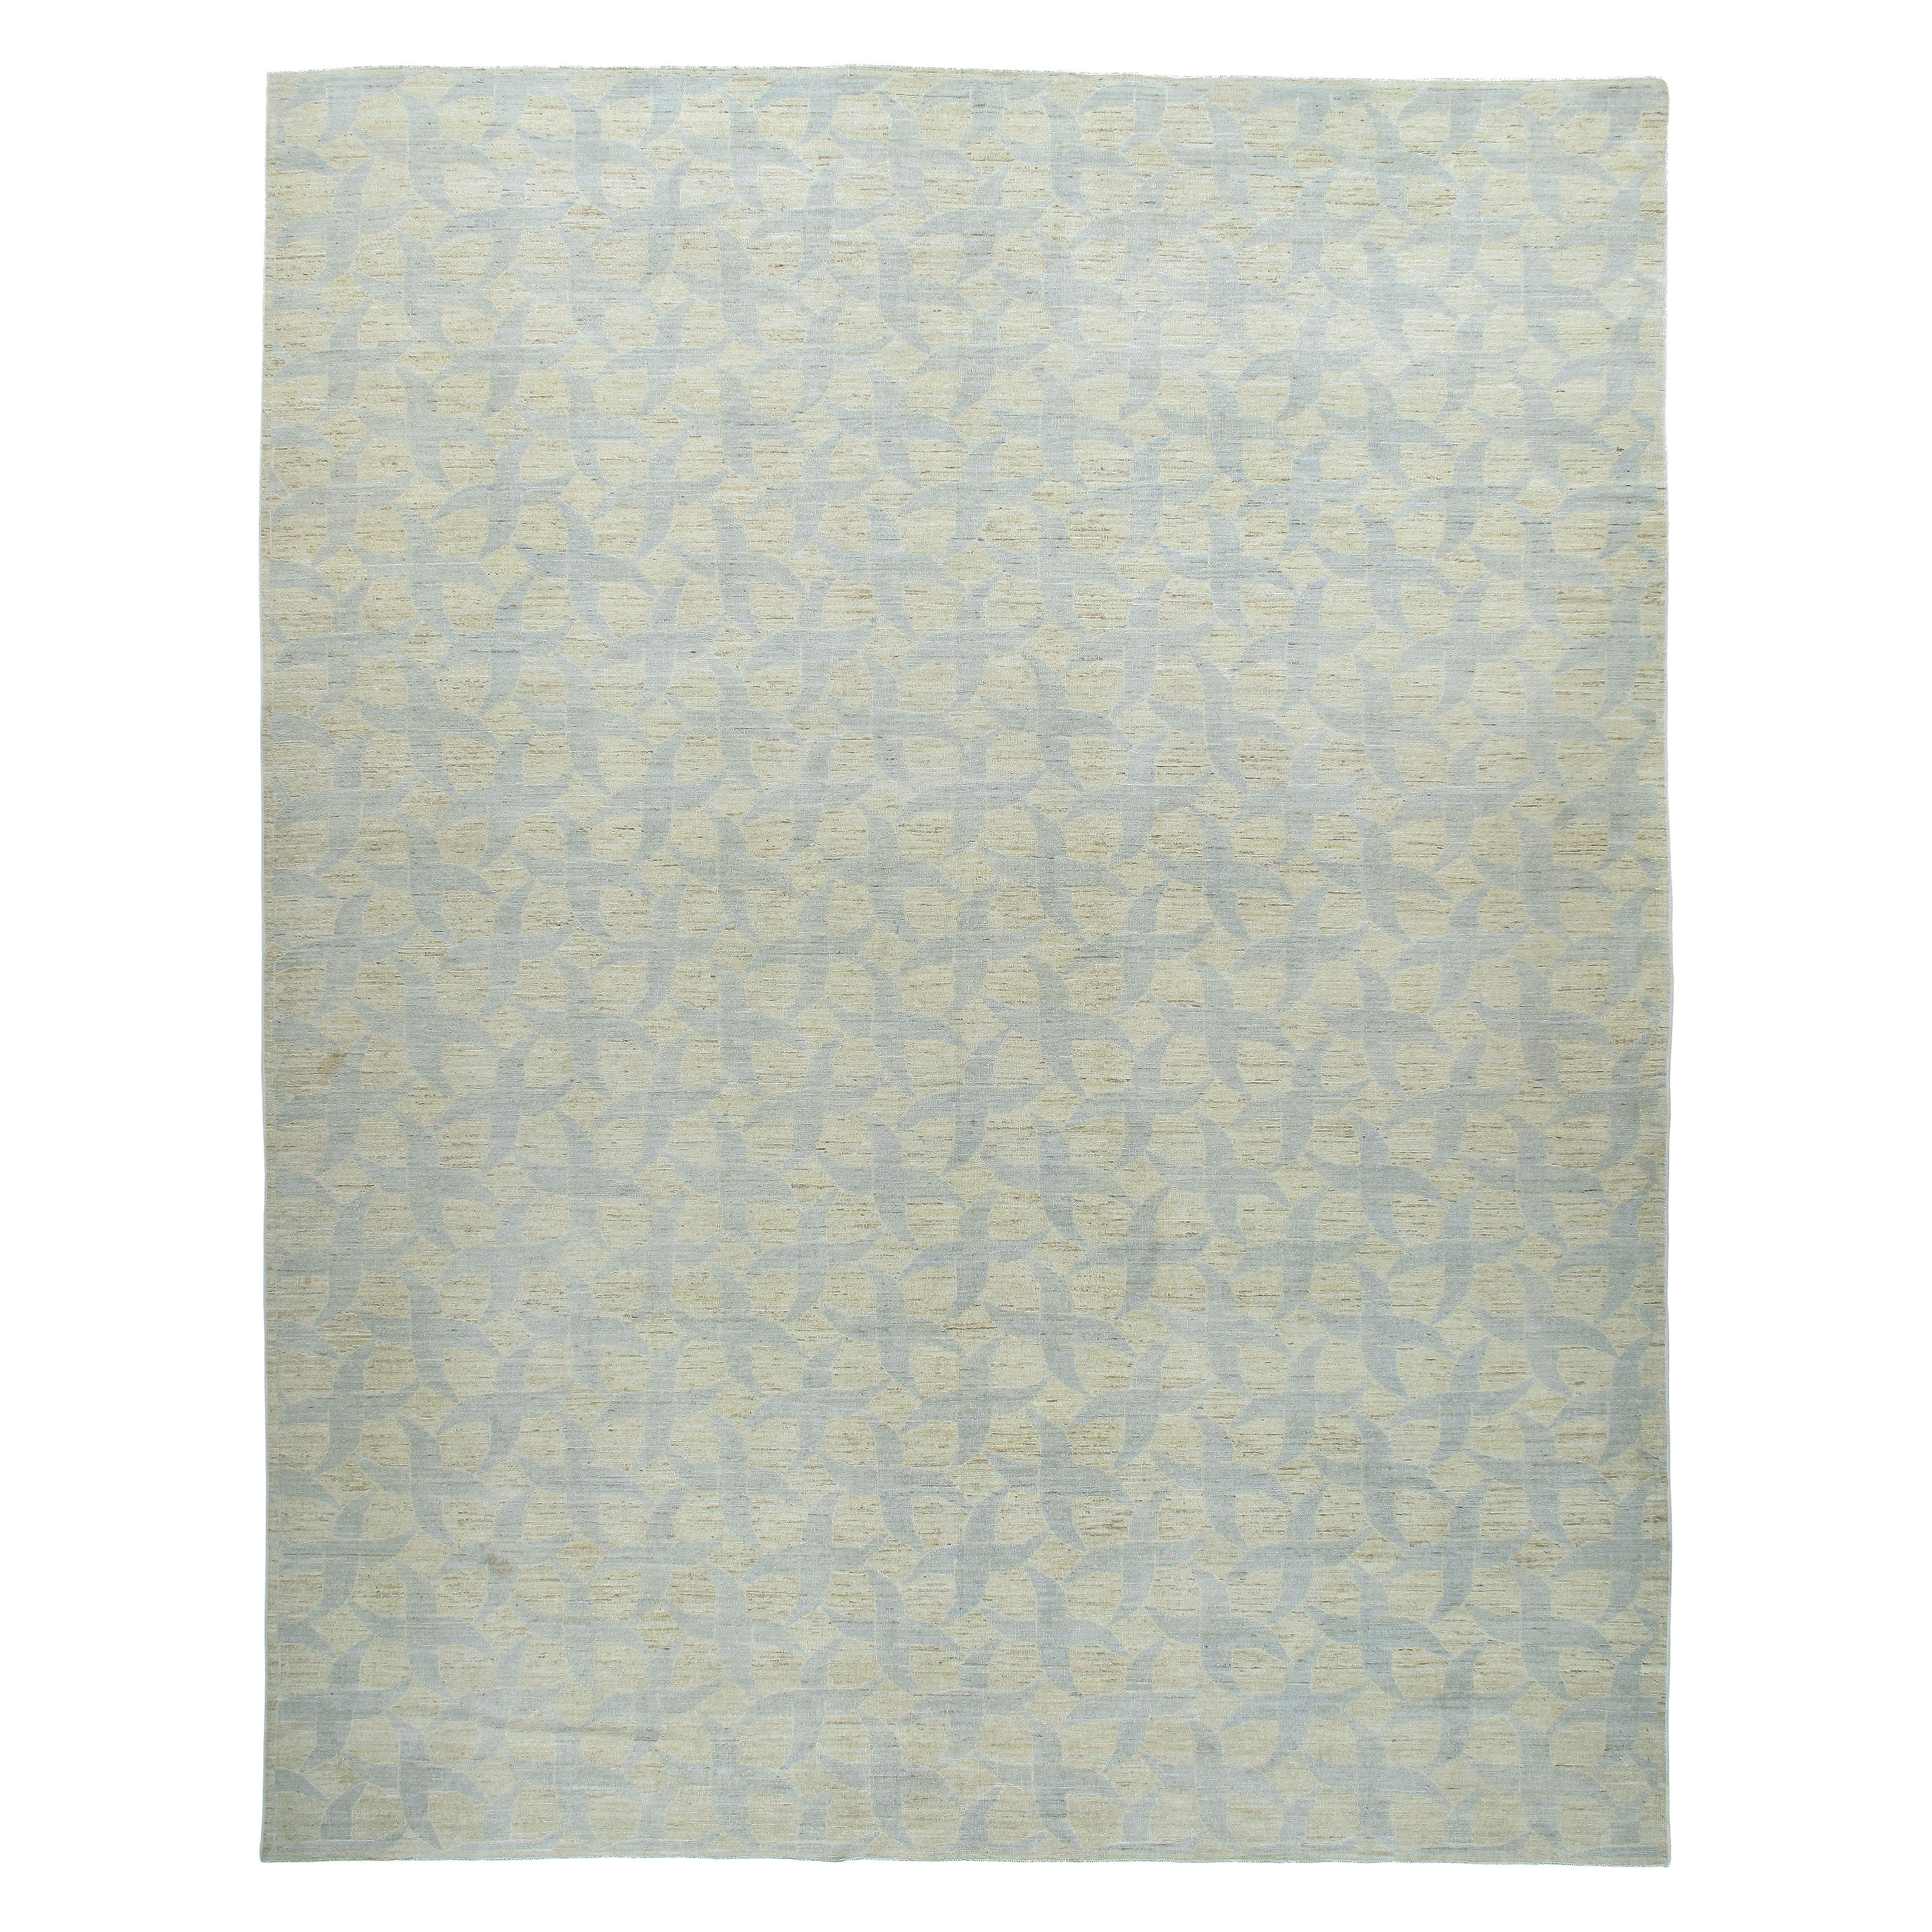 Our Bodega rug is handknotted from the finest hand-carded, hand-spun, naturally dyed wool.